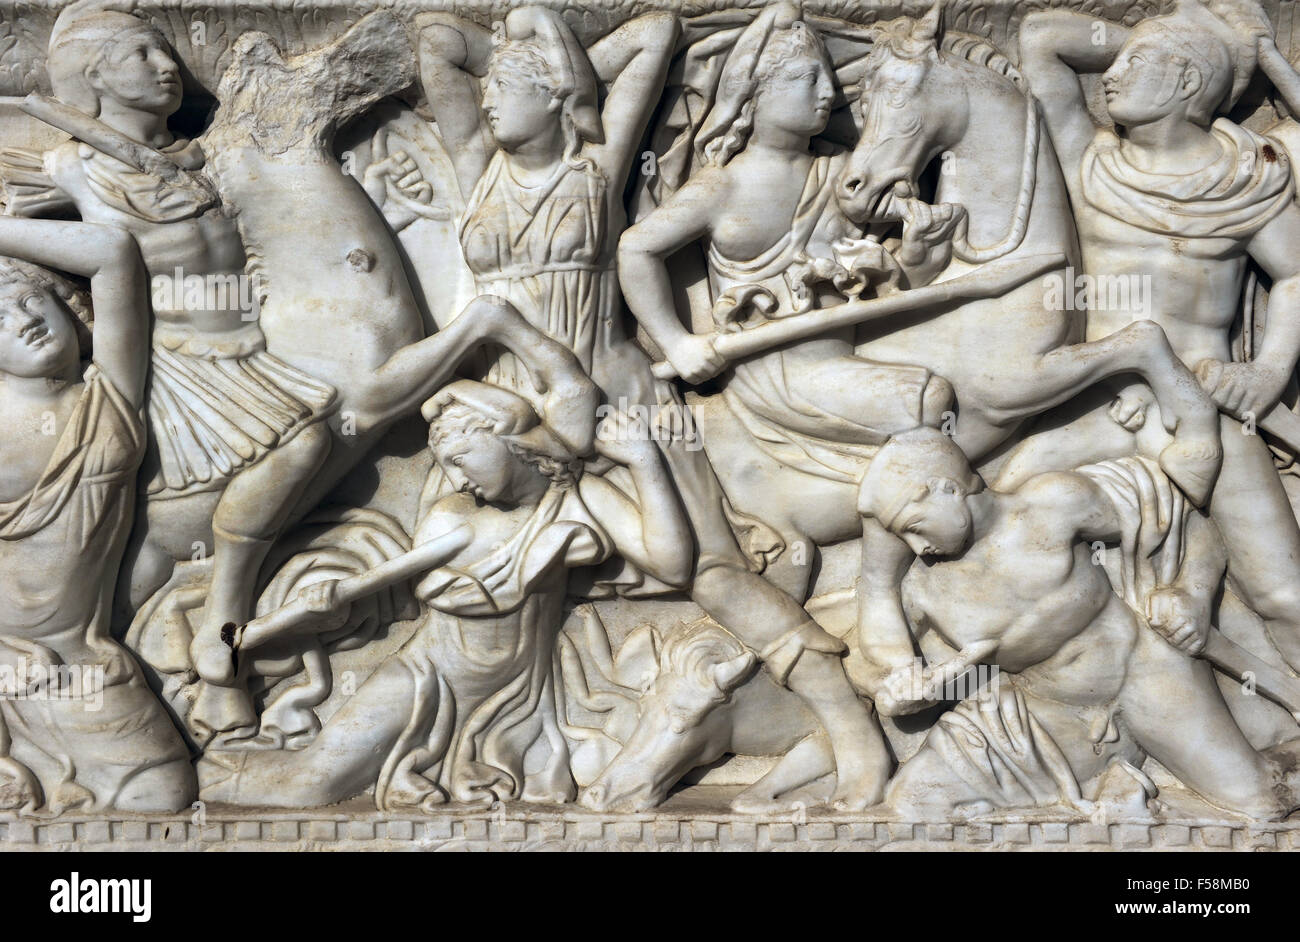 Amazon sarcophagus. Marble. Tel Mevorah. Roman Period. Early 3rd century AD. Detail. Battle between the Amazons and the Greeks. Relief. Rockefeller Archaeological Museum. Jerusalem. Israel. Stock Photo